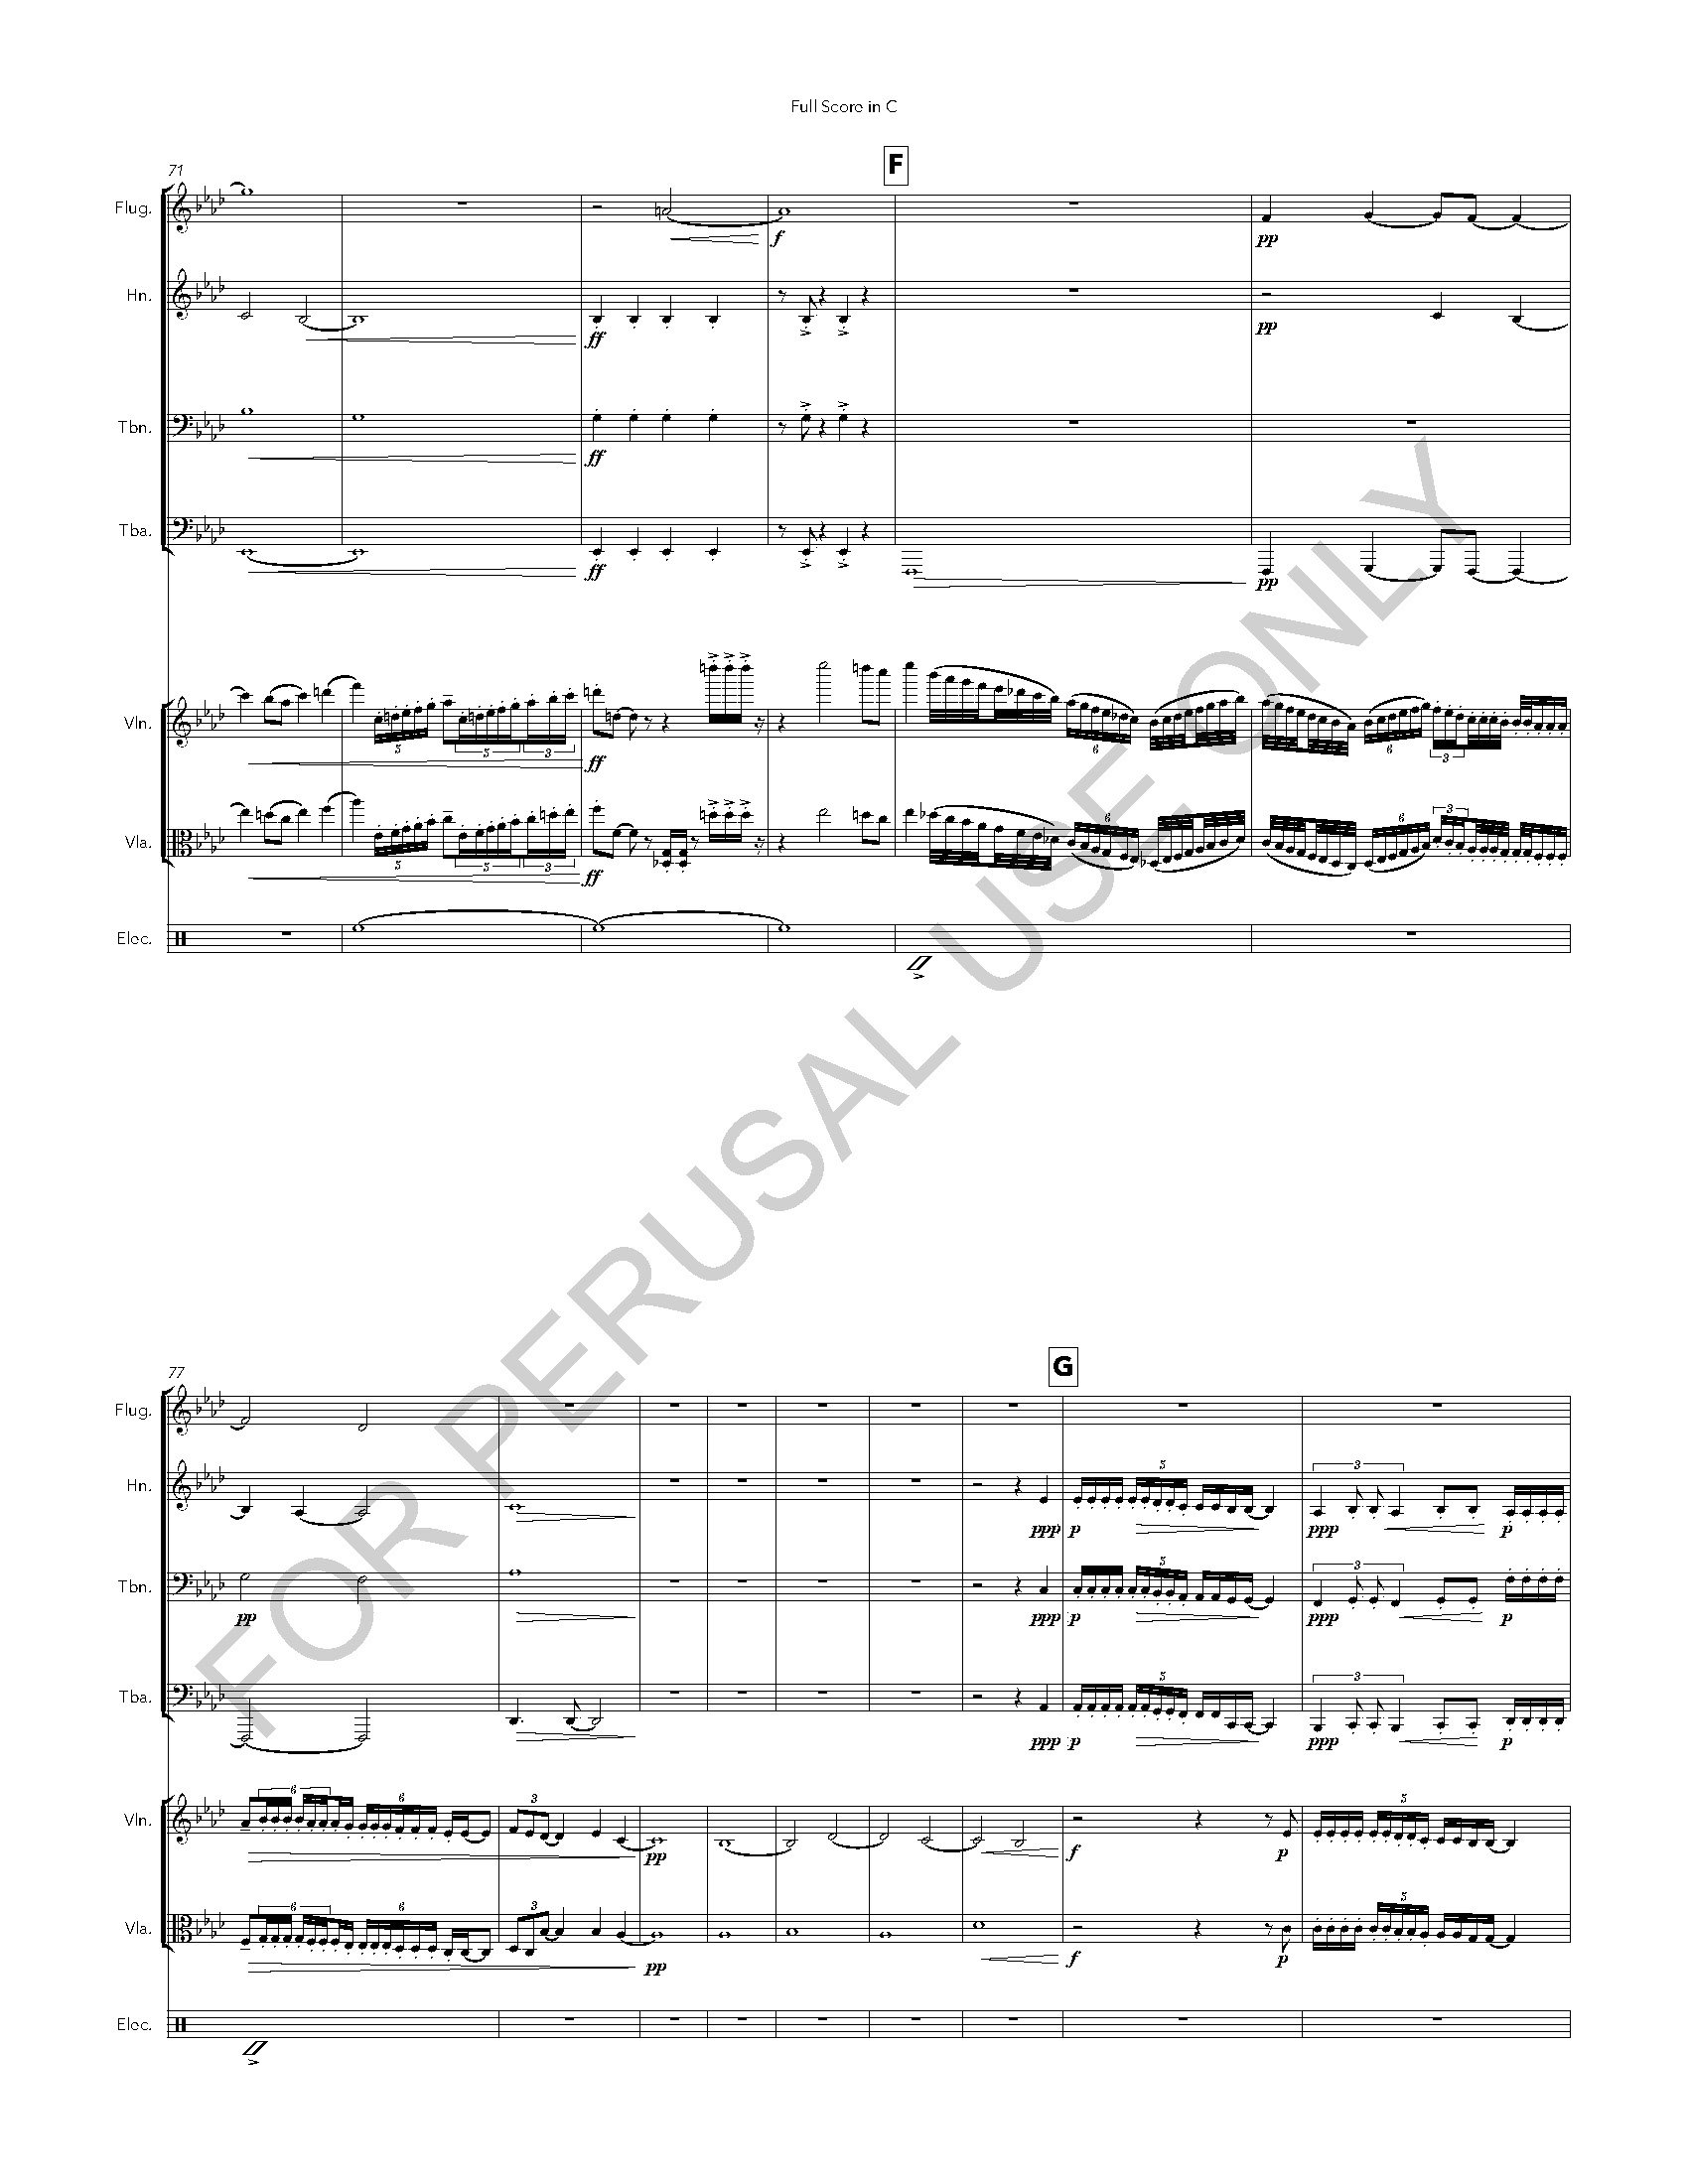 The Other Side of the Sky Full Score in C_Page_07.jpg